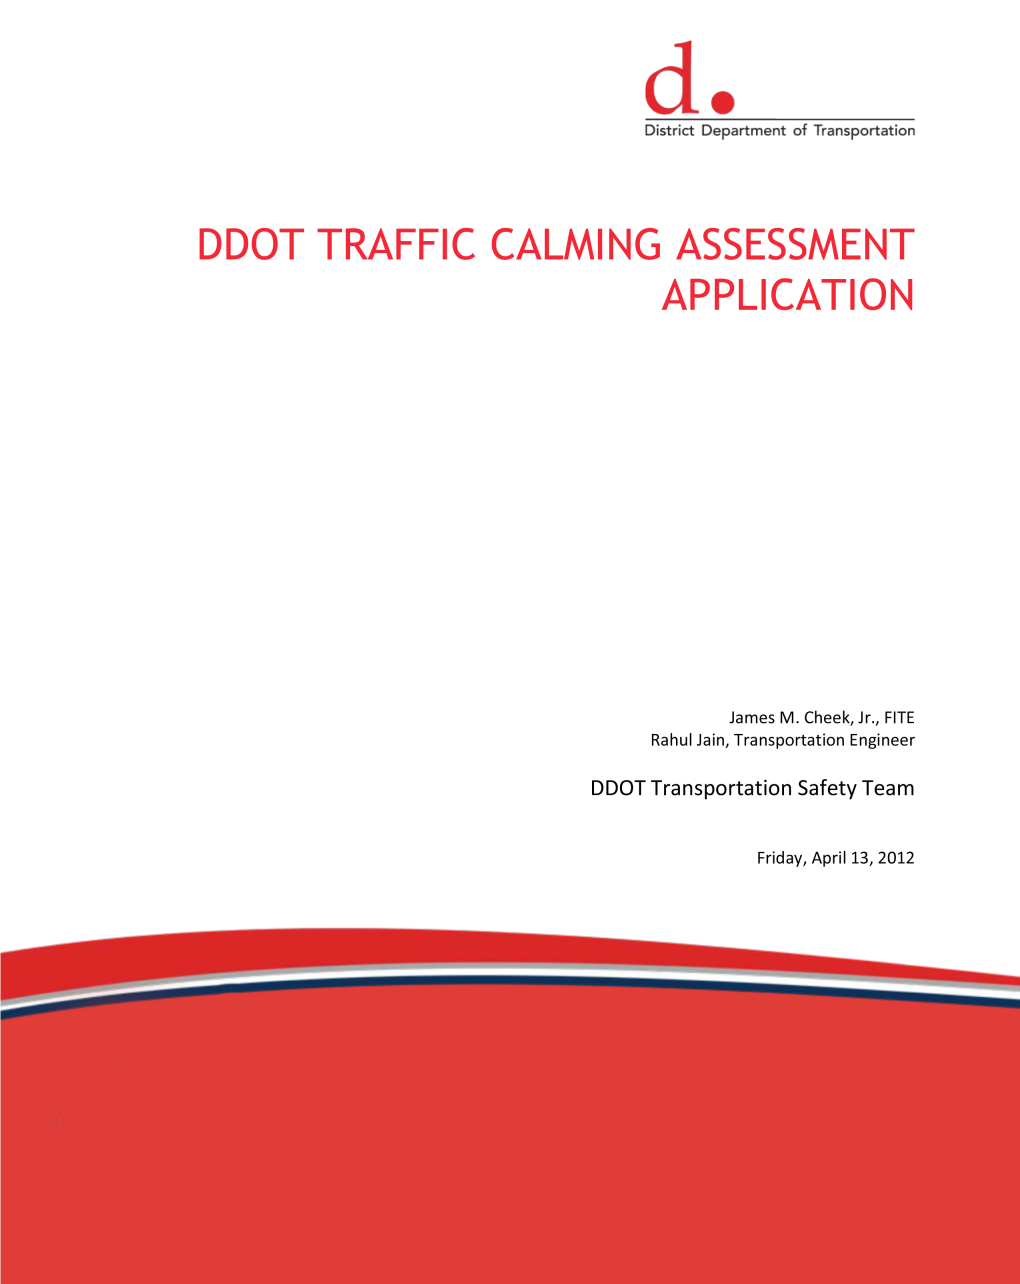 Traffic Calming Petition New Version